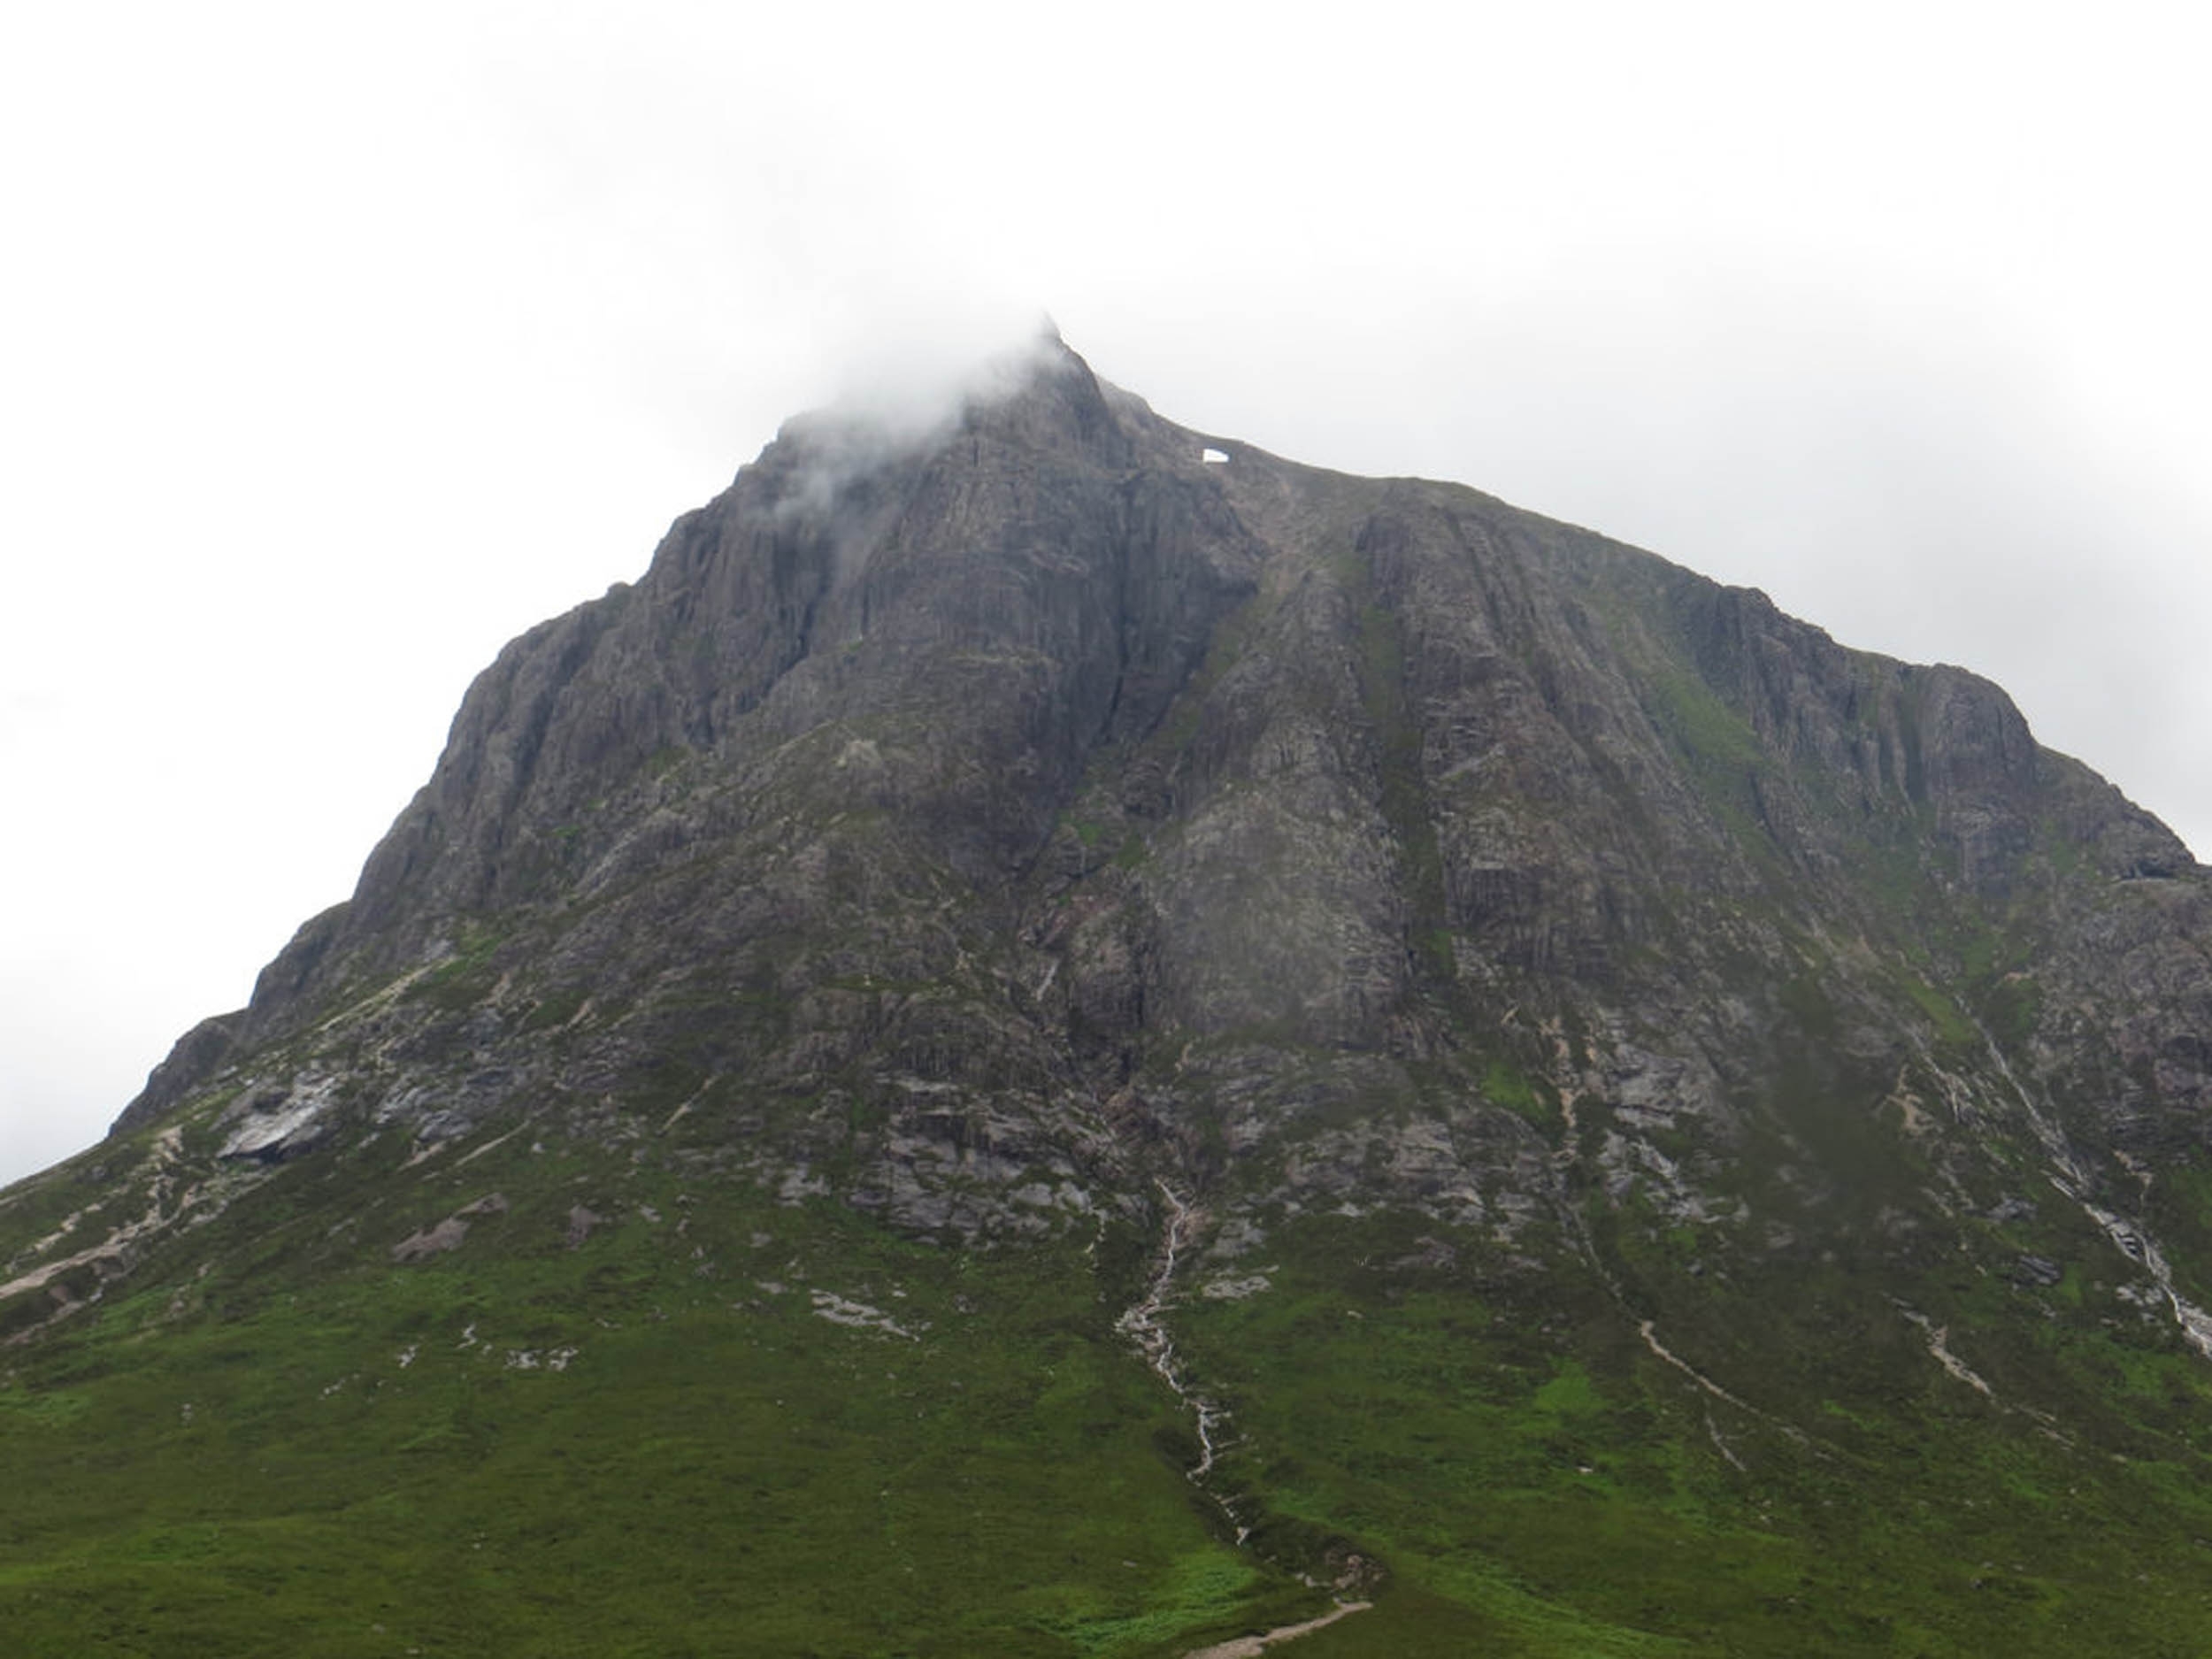 The rare sight of a patch of snow clinging to iconic Buachaille Etive Mor, Glencoe, in August.